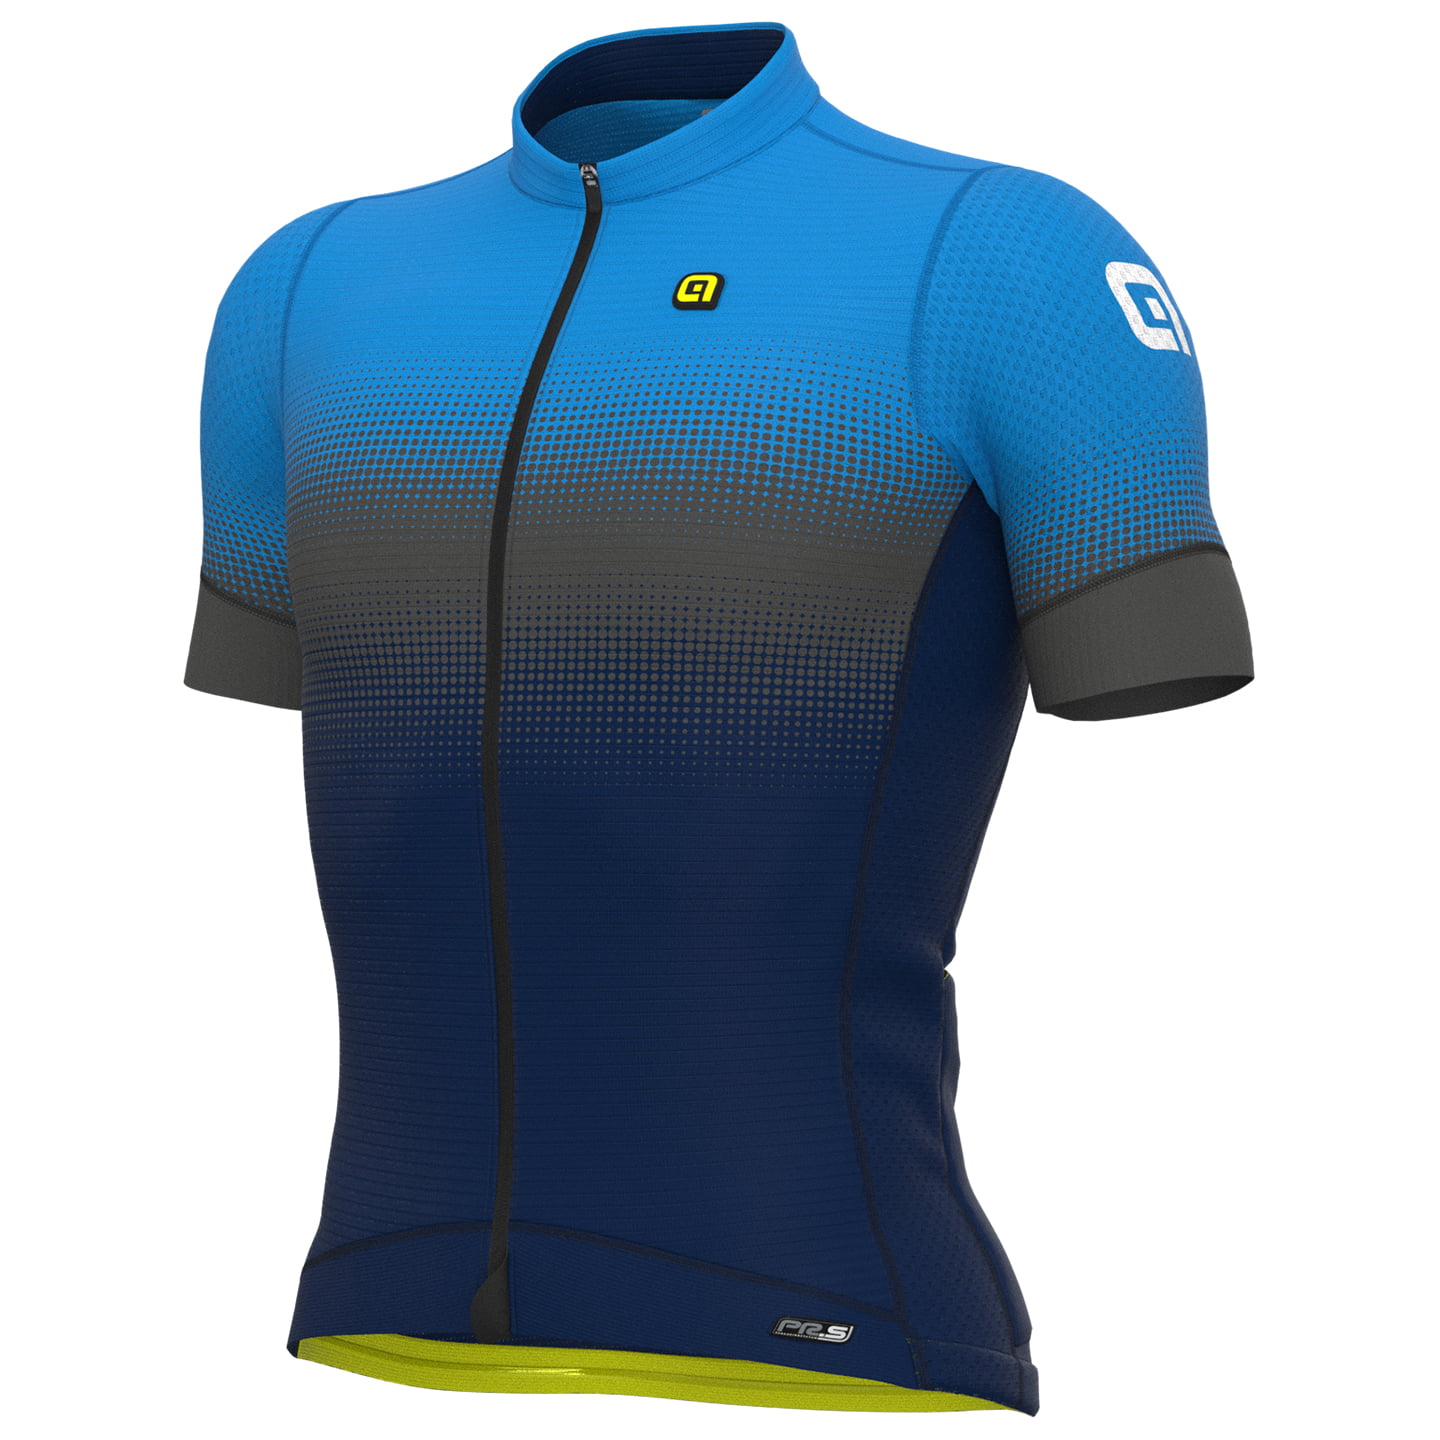 ALE Gradient Short Sleeve Jersey Short Sleeve Jersey, for men, size L, Cycling jersey, Cycling clothing